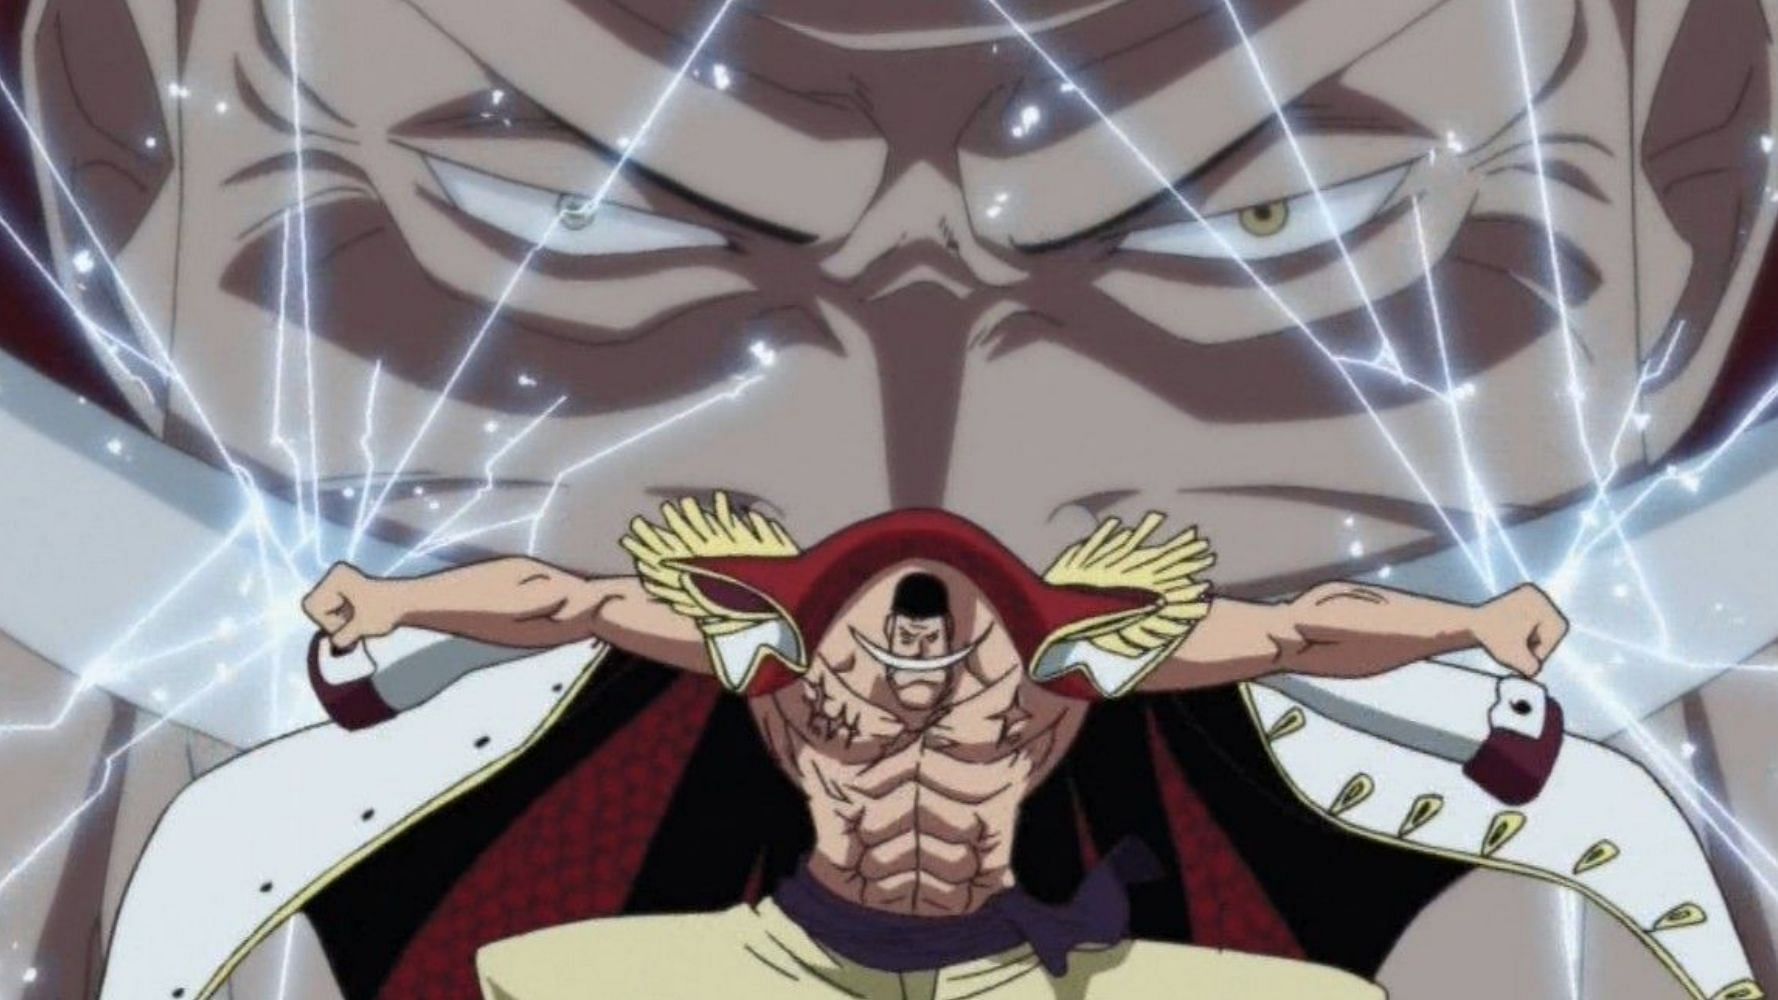 Whitebeard showing off his incredible strength (Image via Toei Animation)